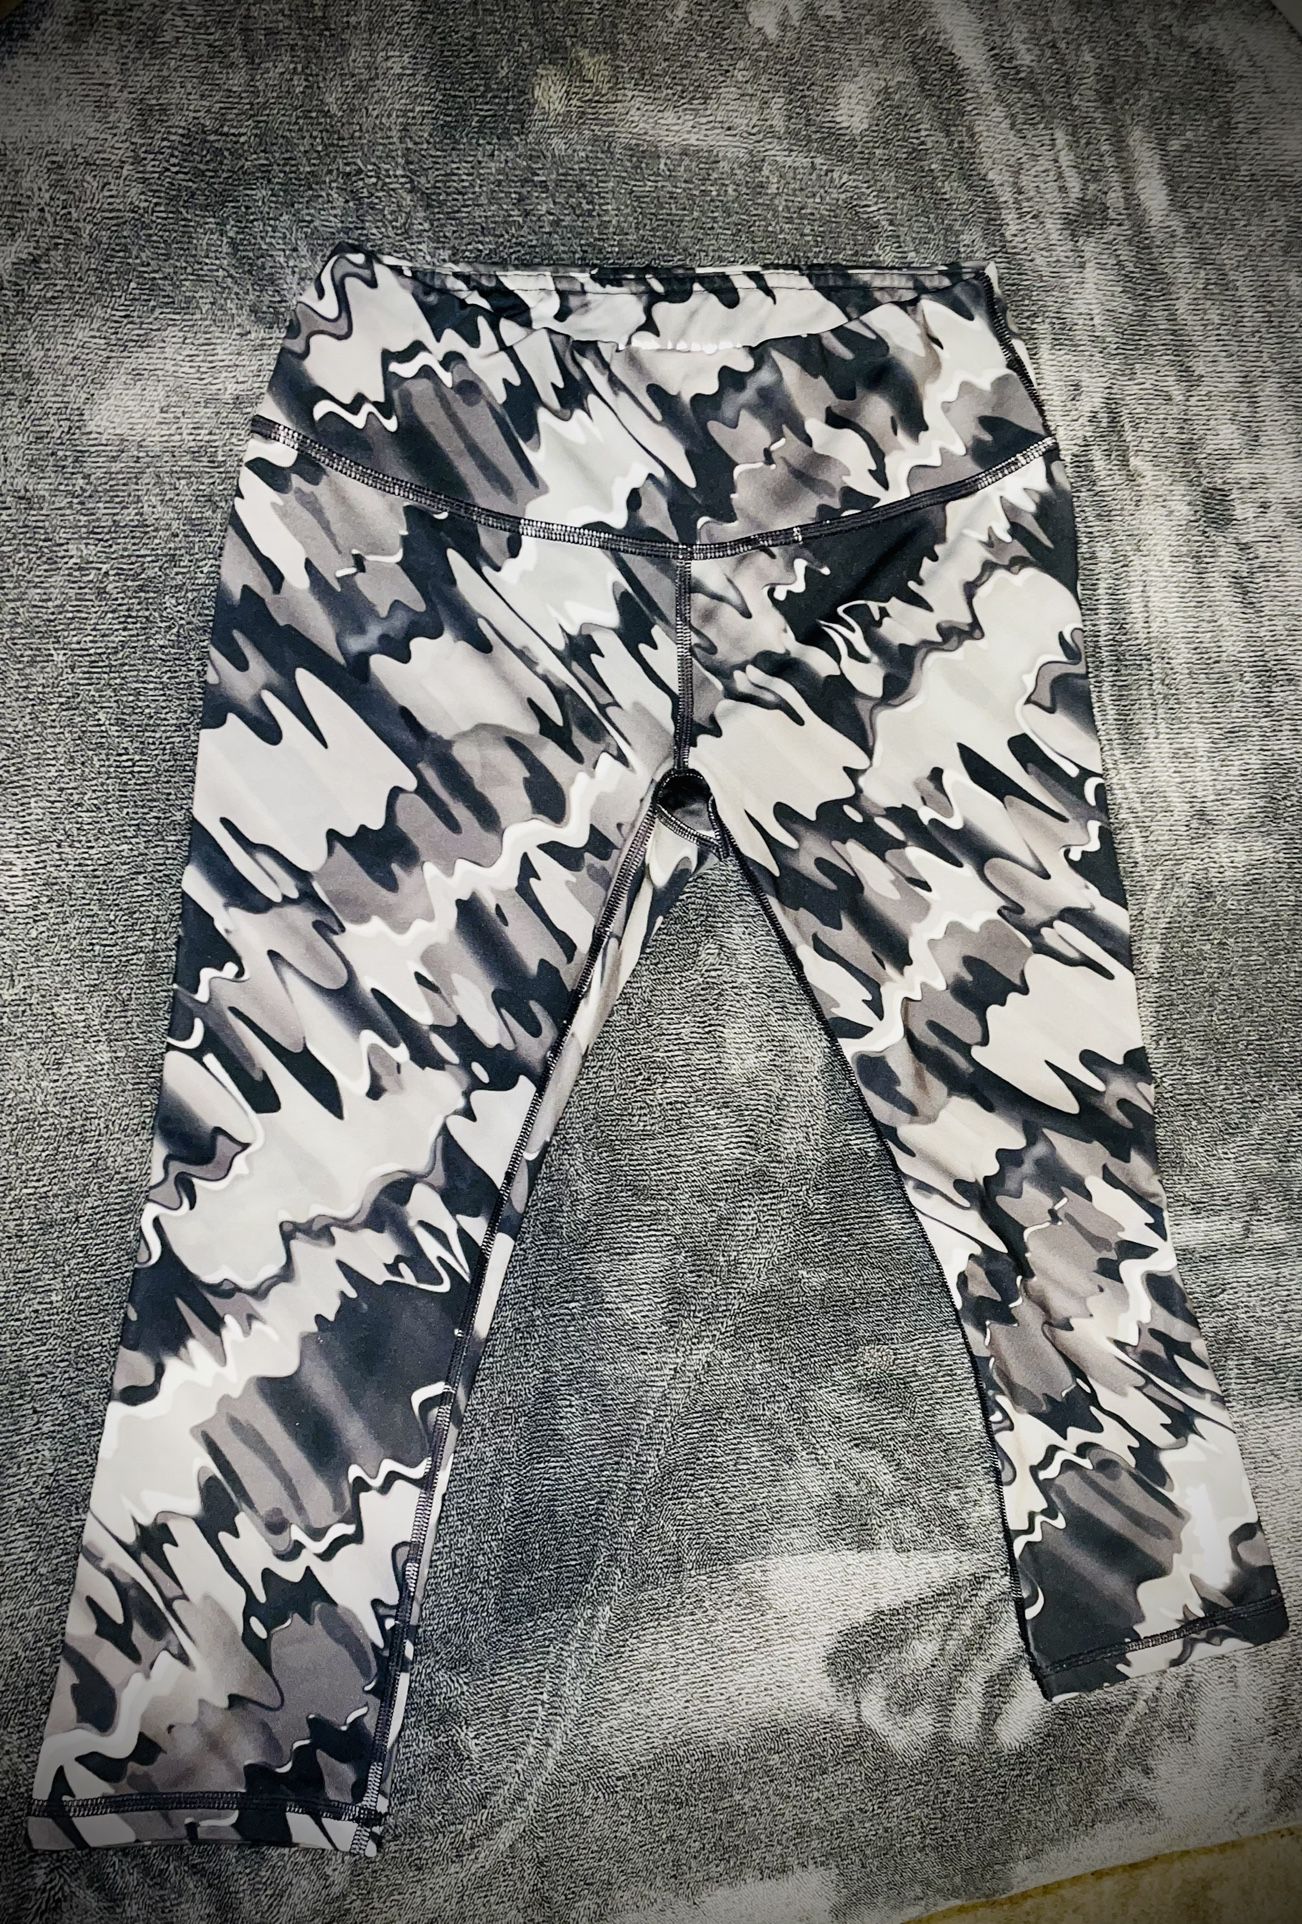 Reebok Black And Gray Workout Capris Size Small